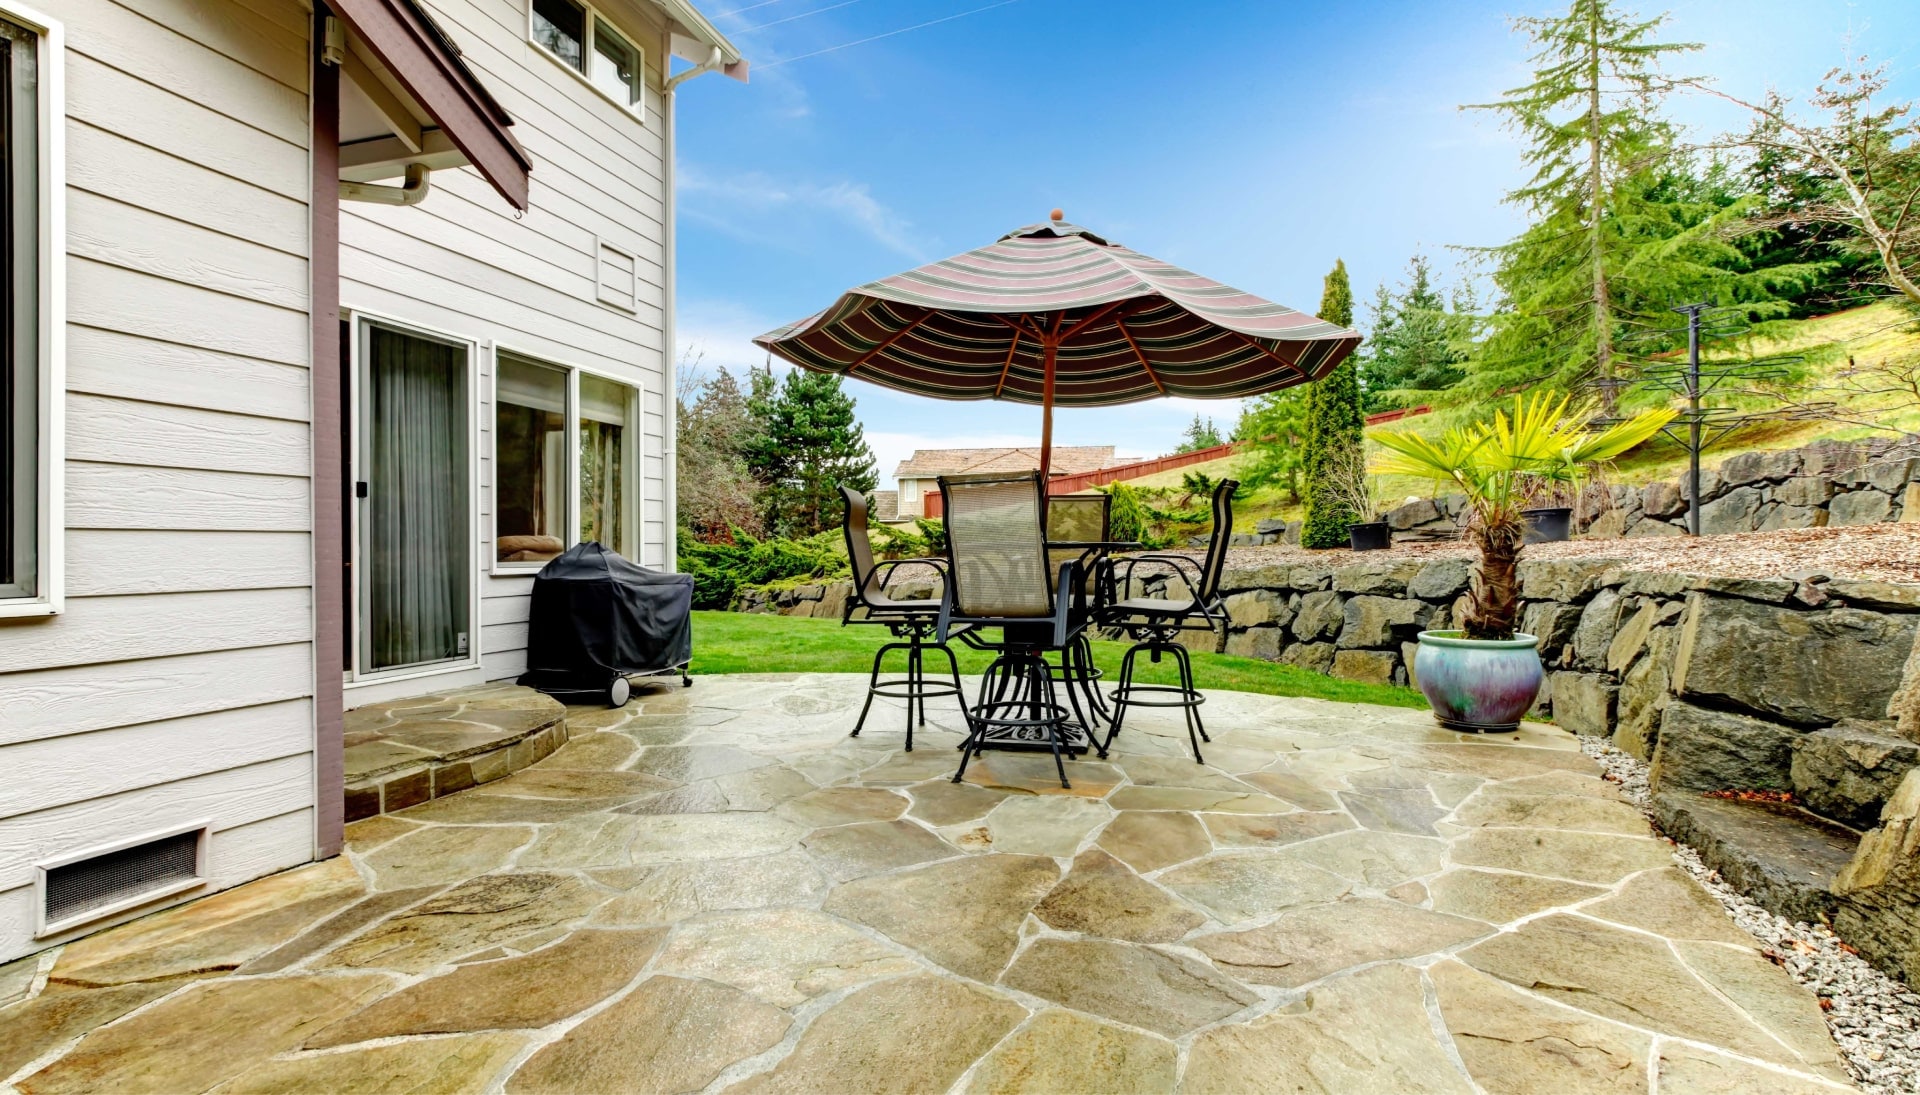 Beautifully Textured and Patterned Concrete Patios in Prescott, Arizona area!